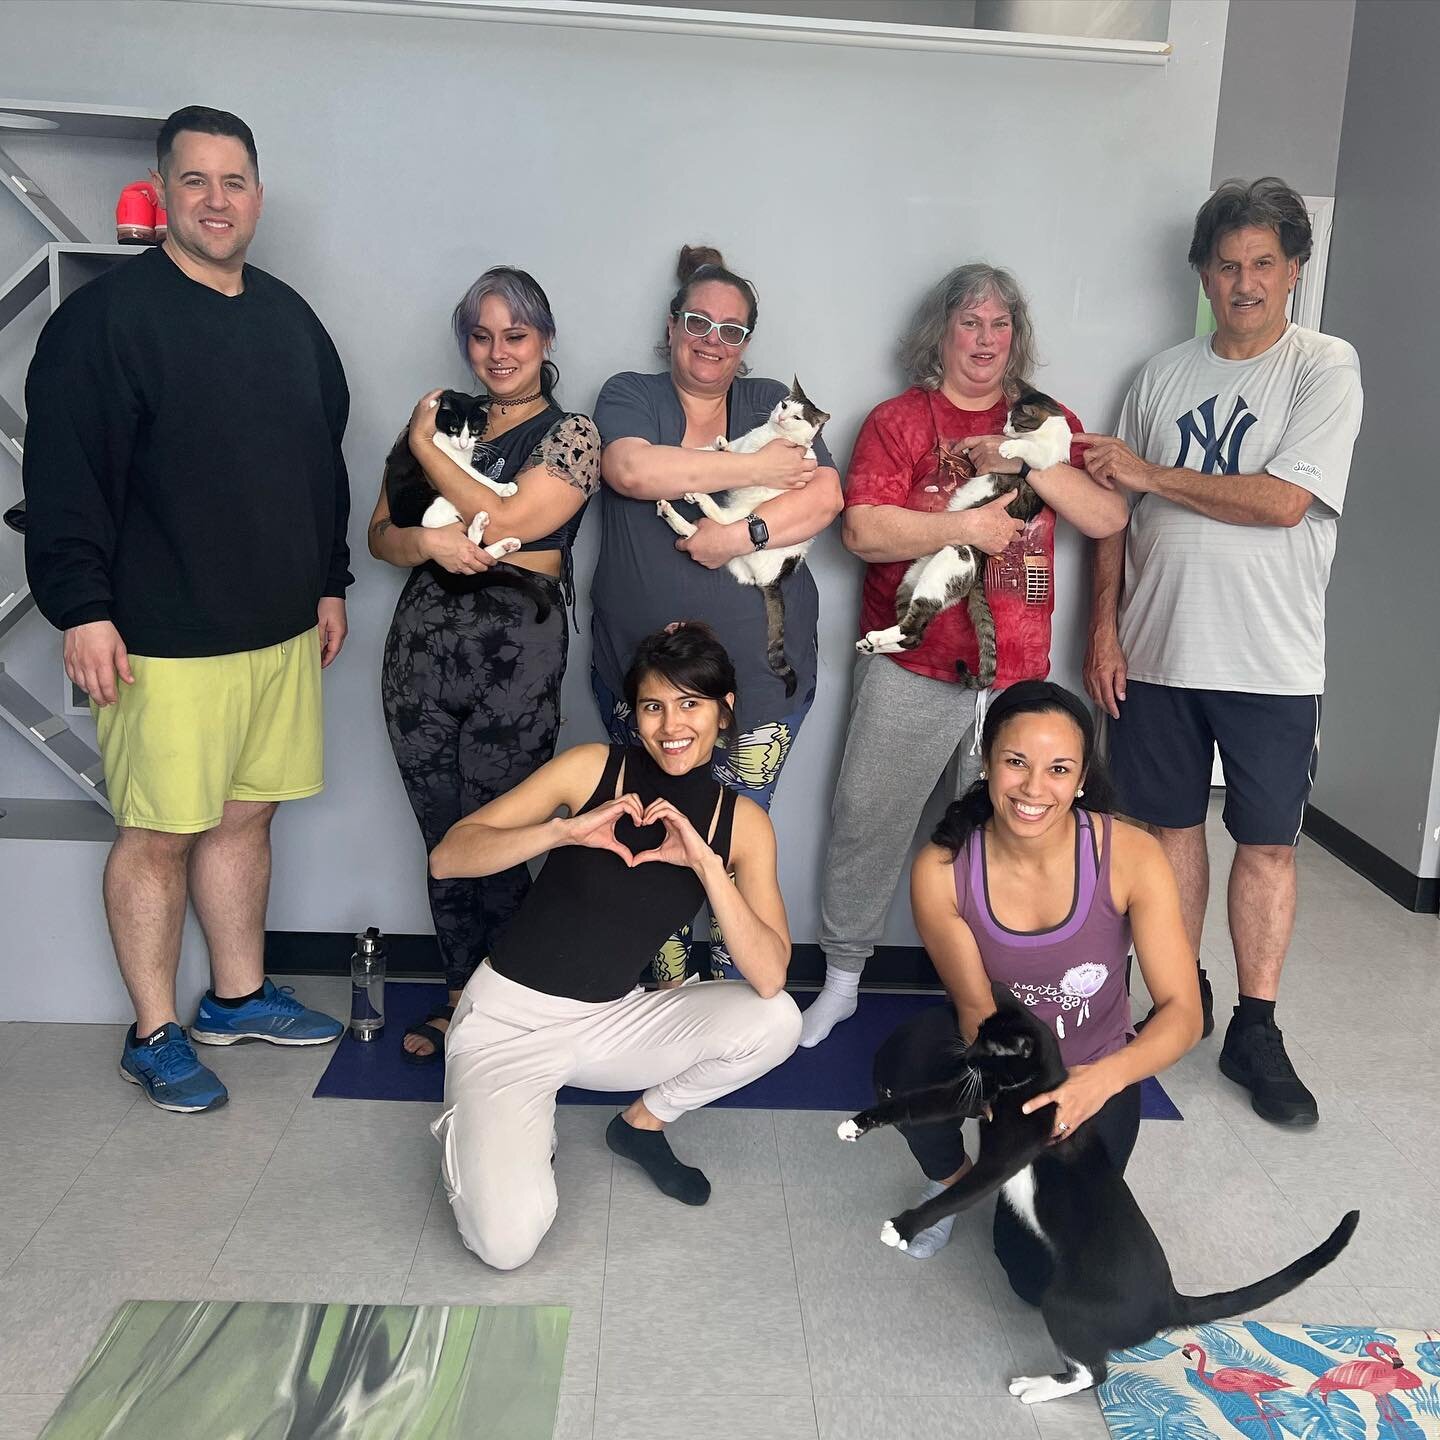 Another purr-fect 🐈 yoga session at @thecatnookcafe today! Thank you to those who joined us! The cats appreciate the entertainment 😸 &amp; your generous donations to support their quality care! We hope to see everyone again next month, in-person or